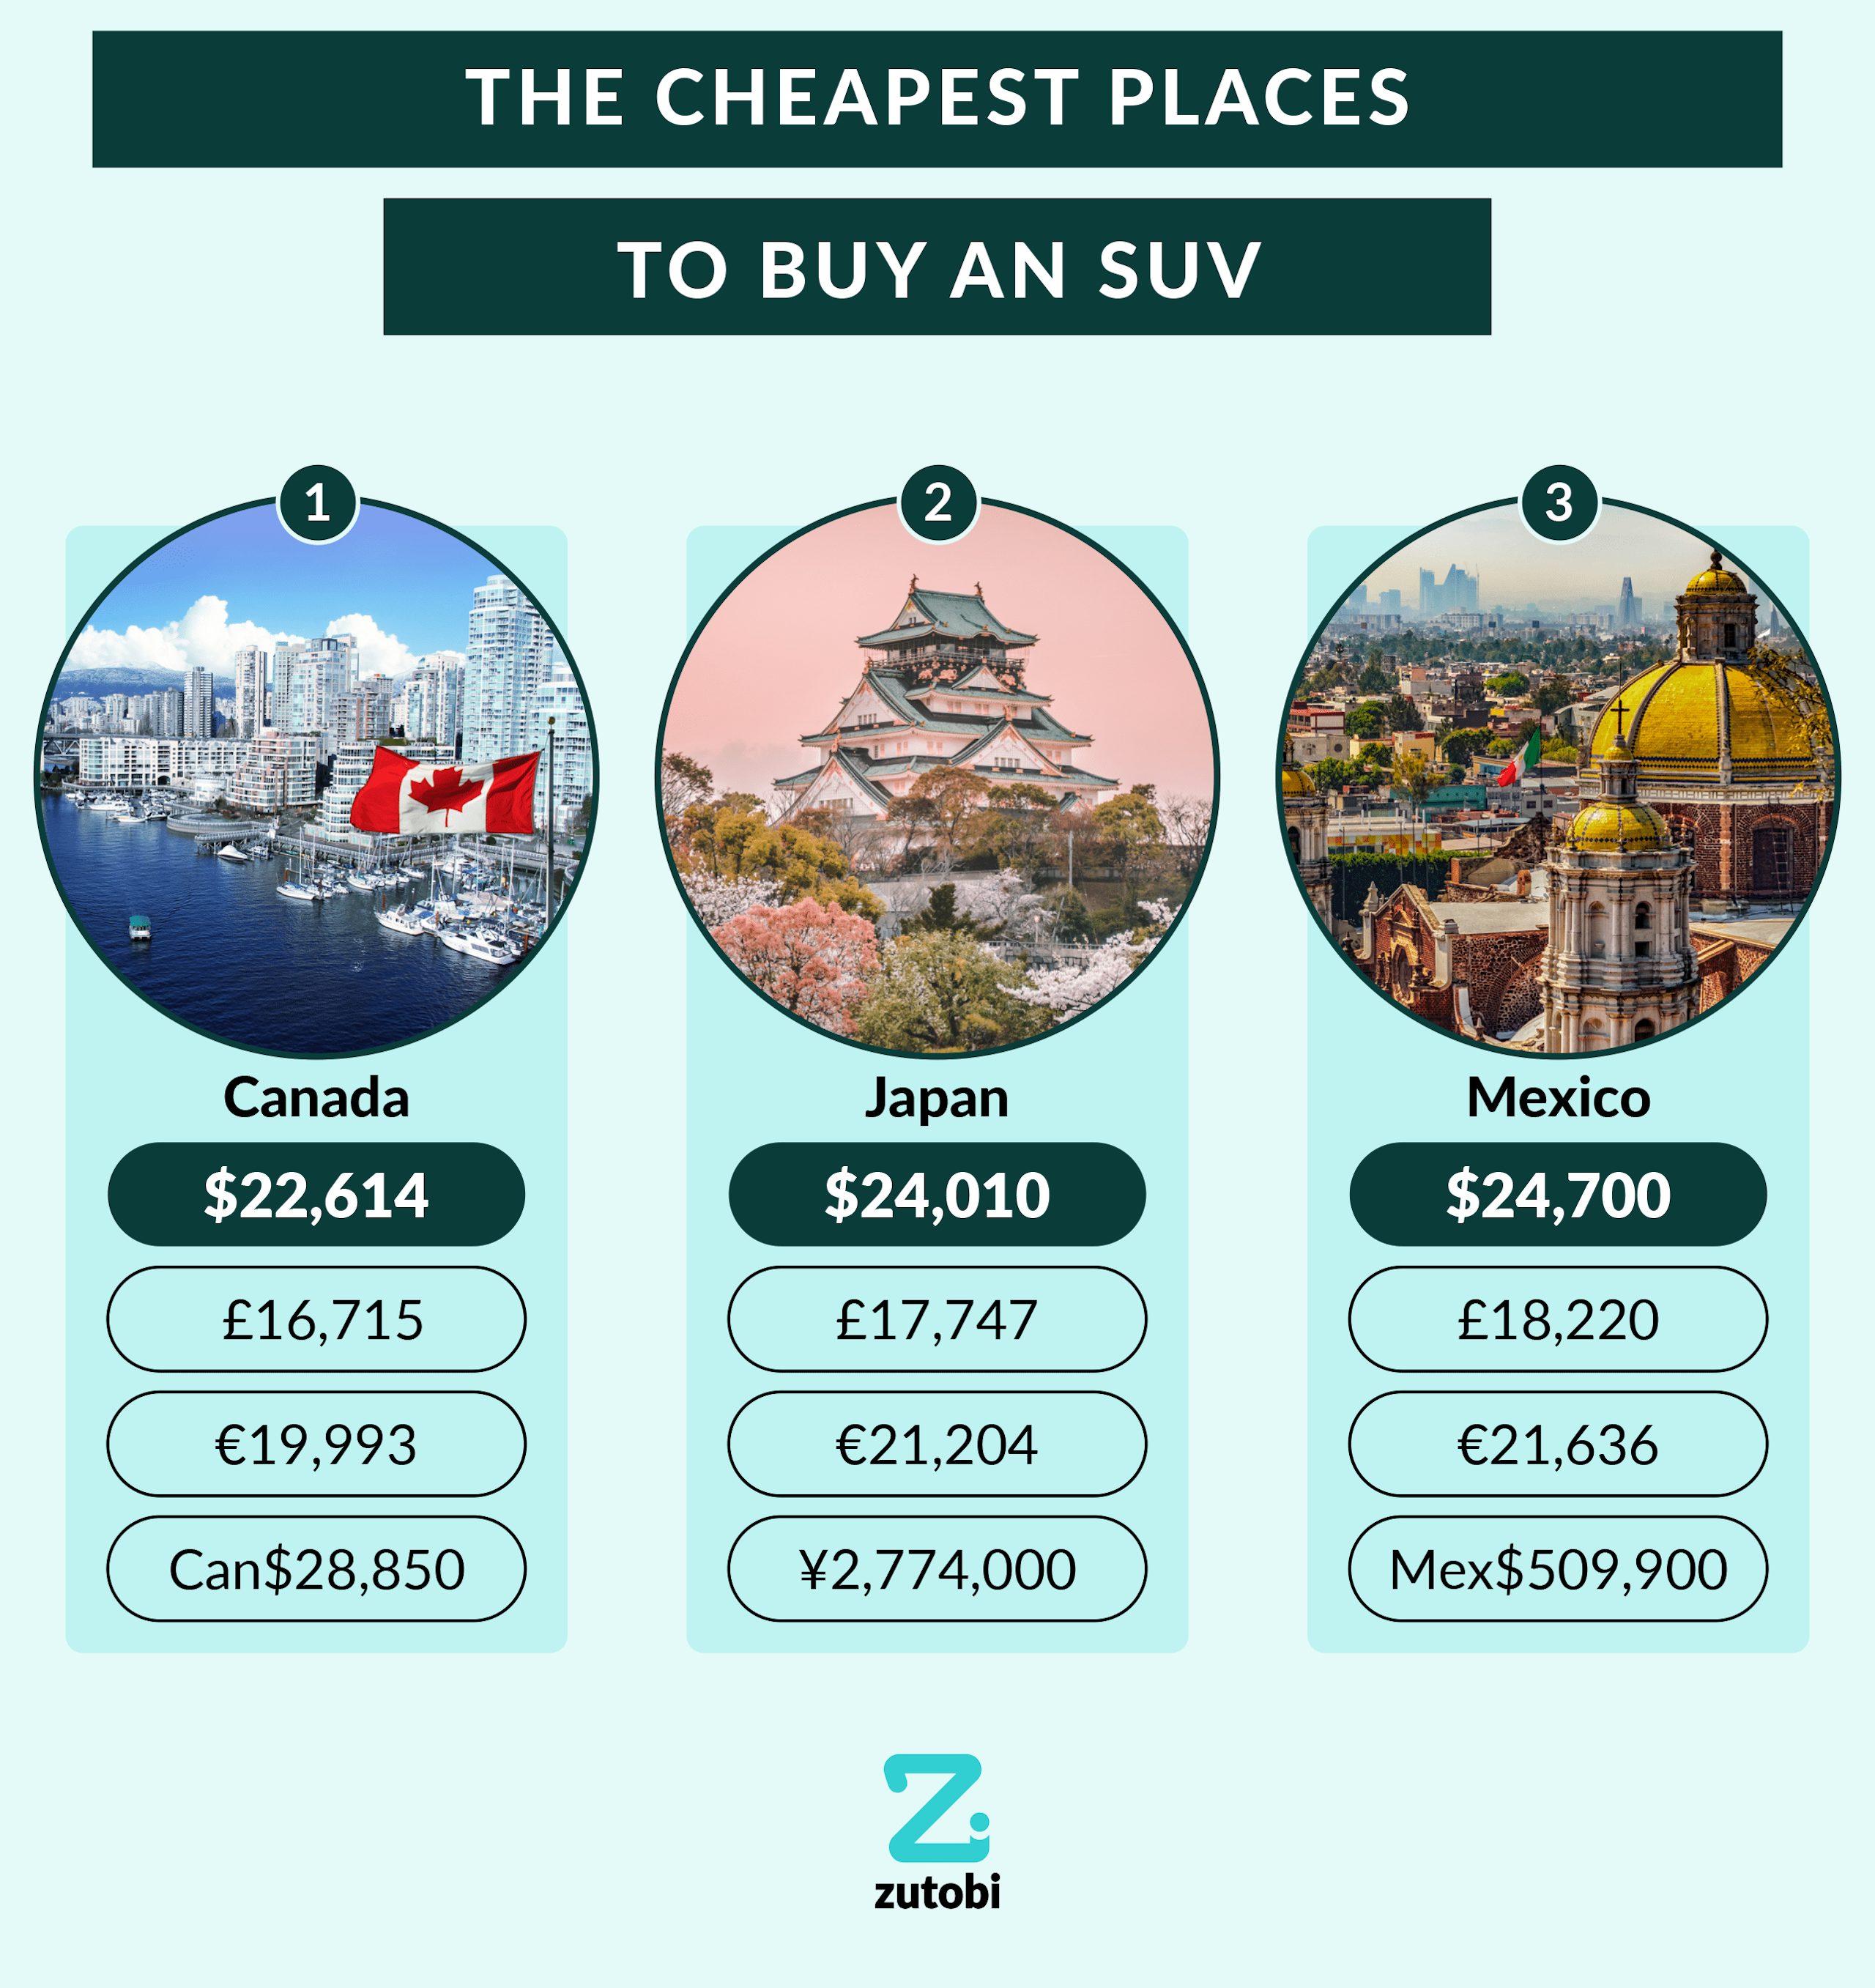 The Cheapest Places to Buy an SUV